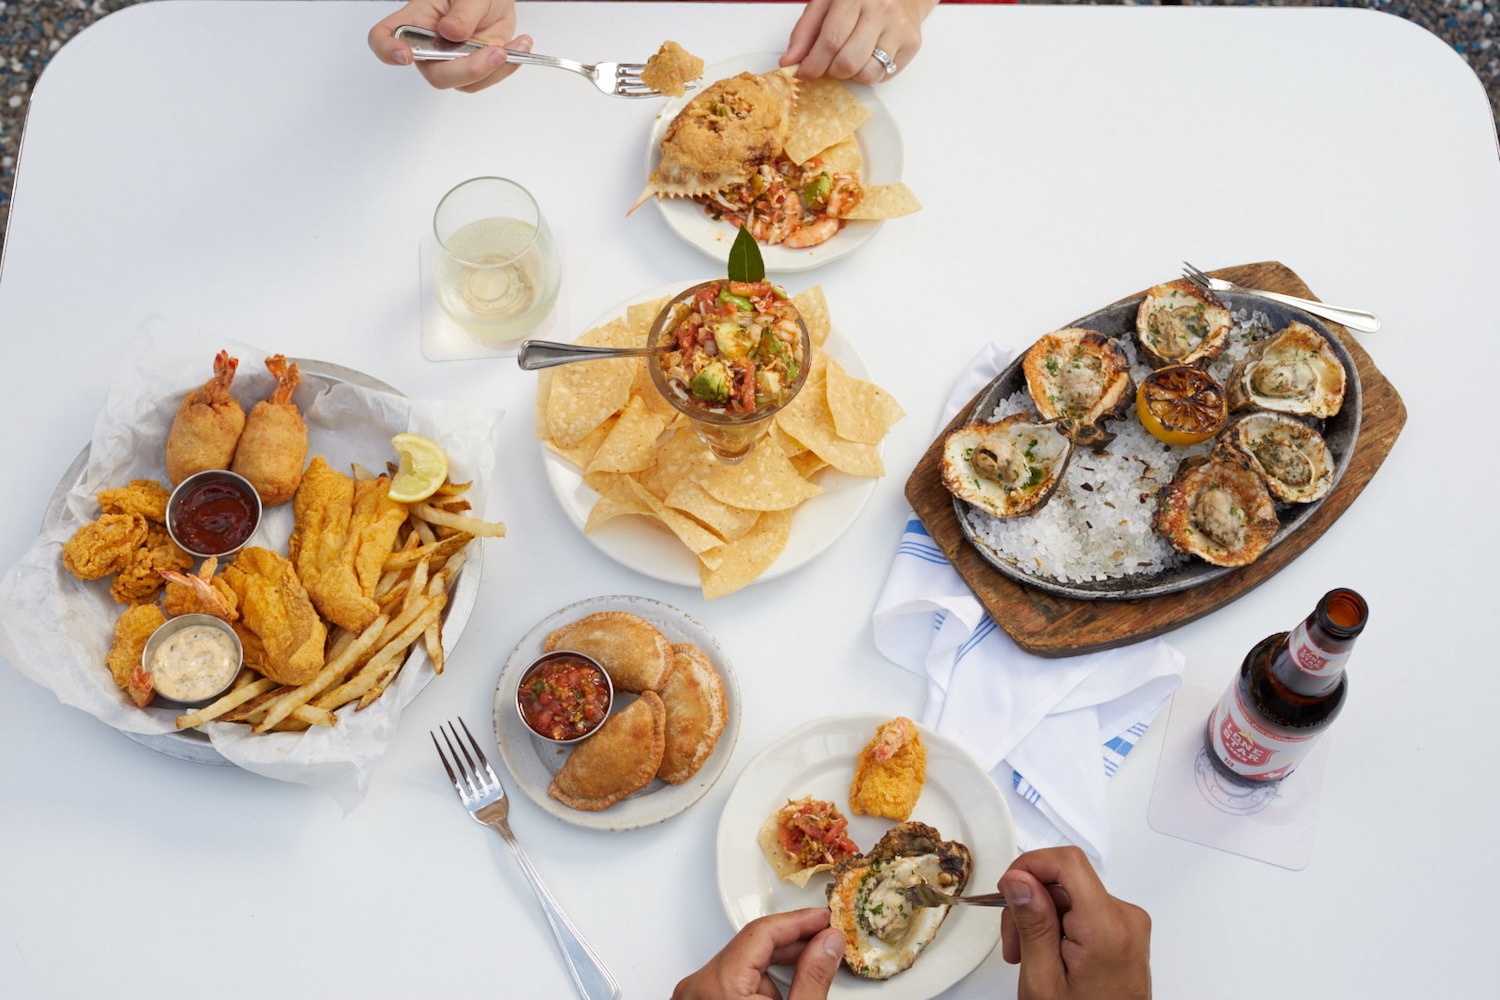 Goode Co. Seafood is a haven for seafood snacks like shrimp cocktail, smoked redfish dip, and campechana